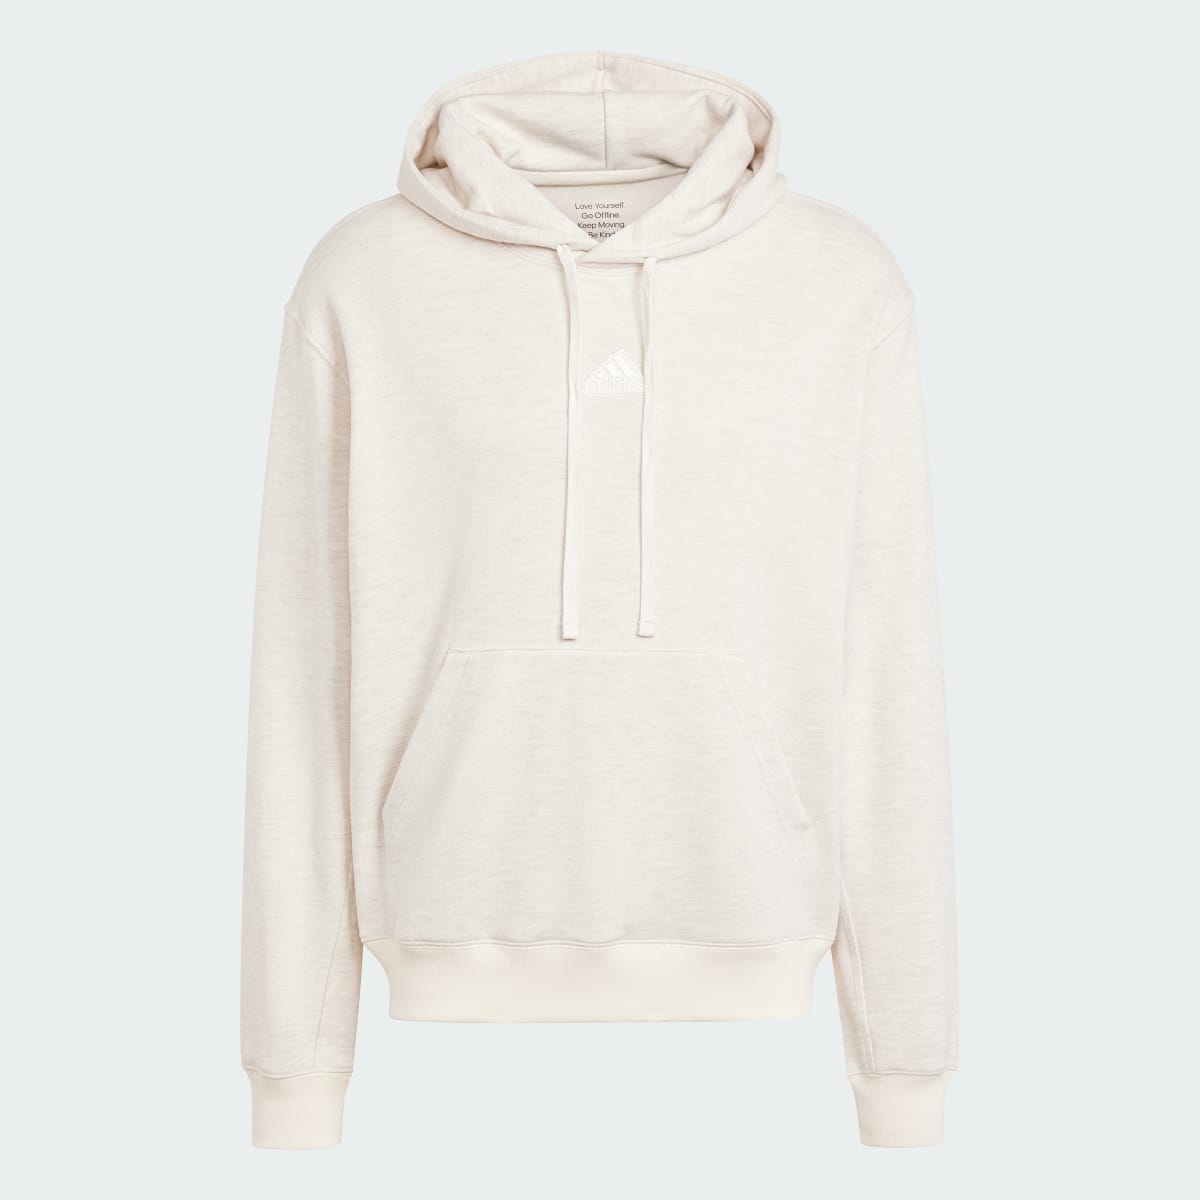 Adidas Lounge French Terry Colored Mélange Hoodie. 5